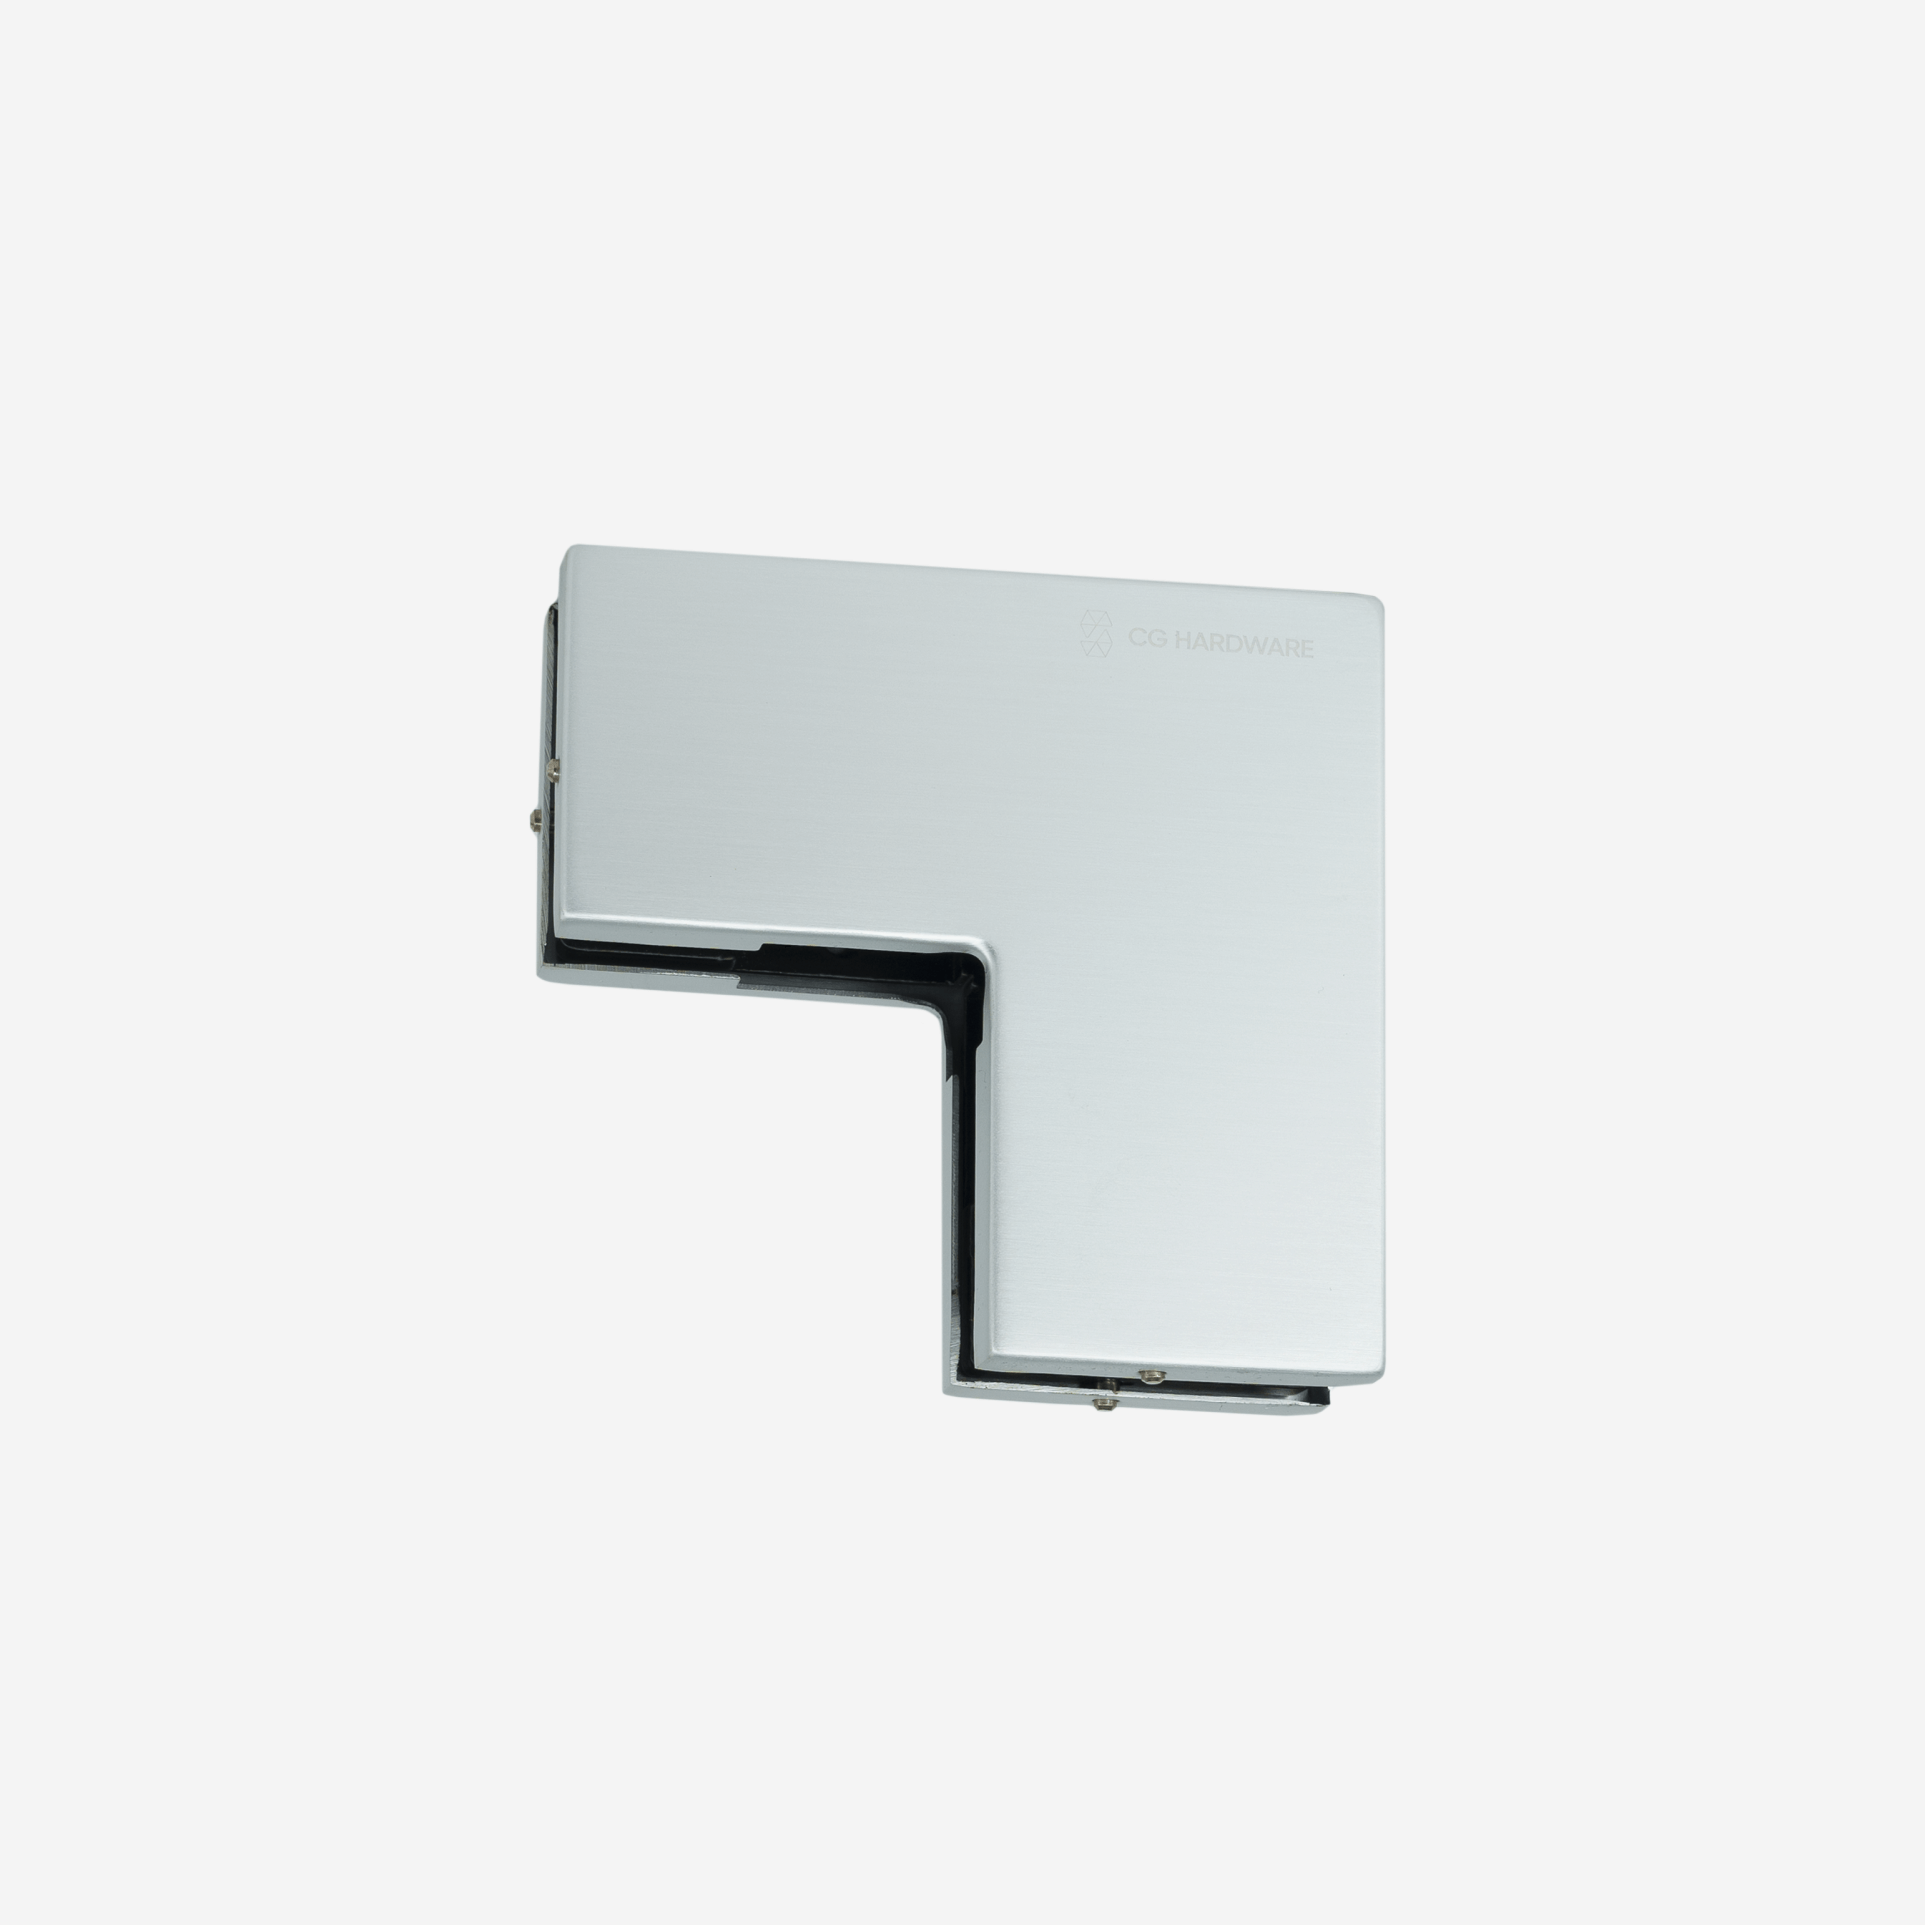 Sidelite Mounted Transom Patch - Satin anodized